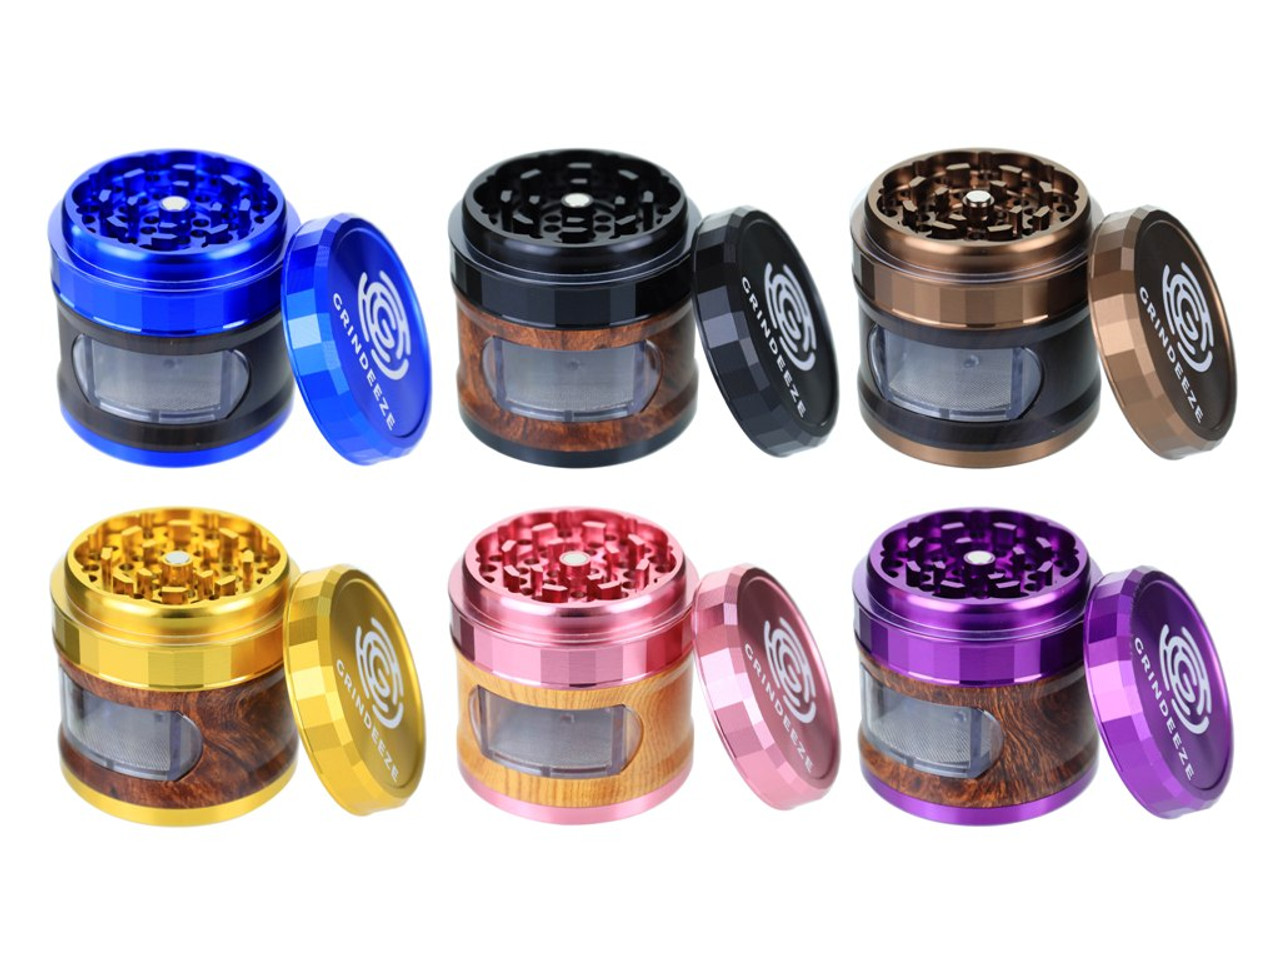 Grind Eeze 63mm Grinder with Pull Out Side and Grain Finish - Assorted Colors